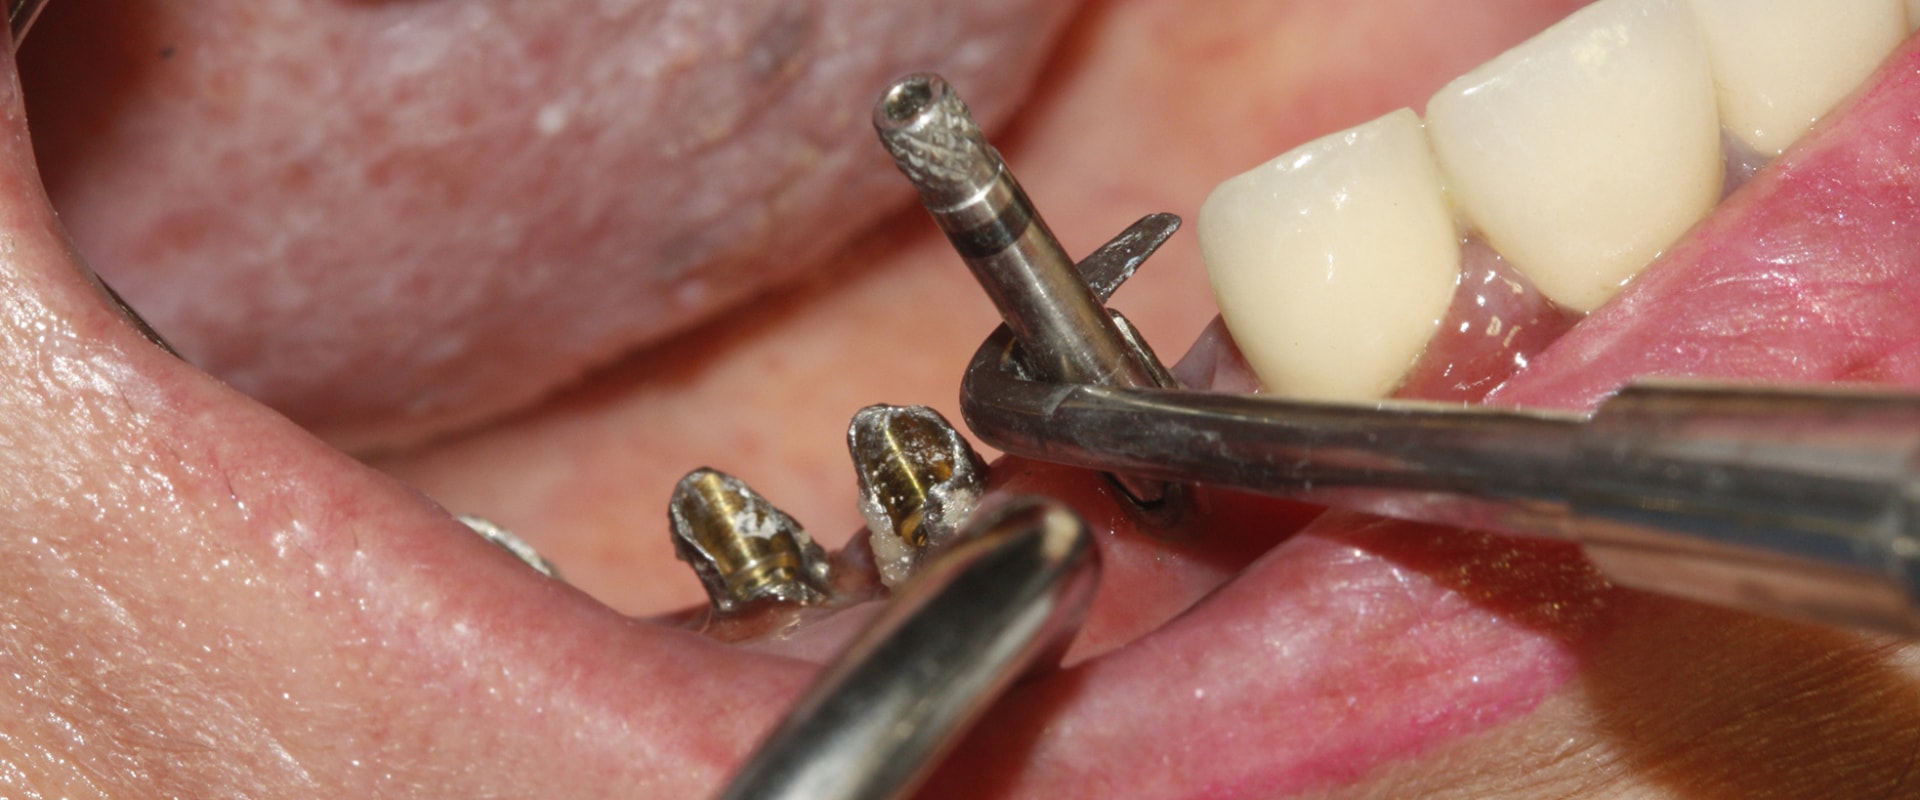 Can the screws be removed from dental implants?